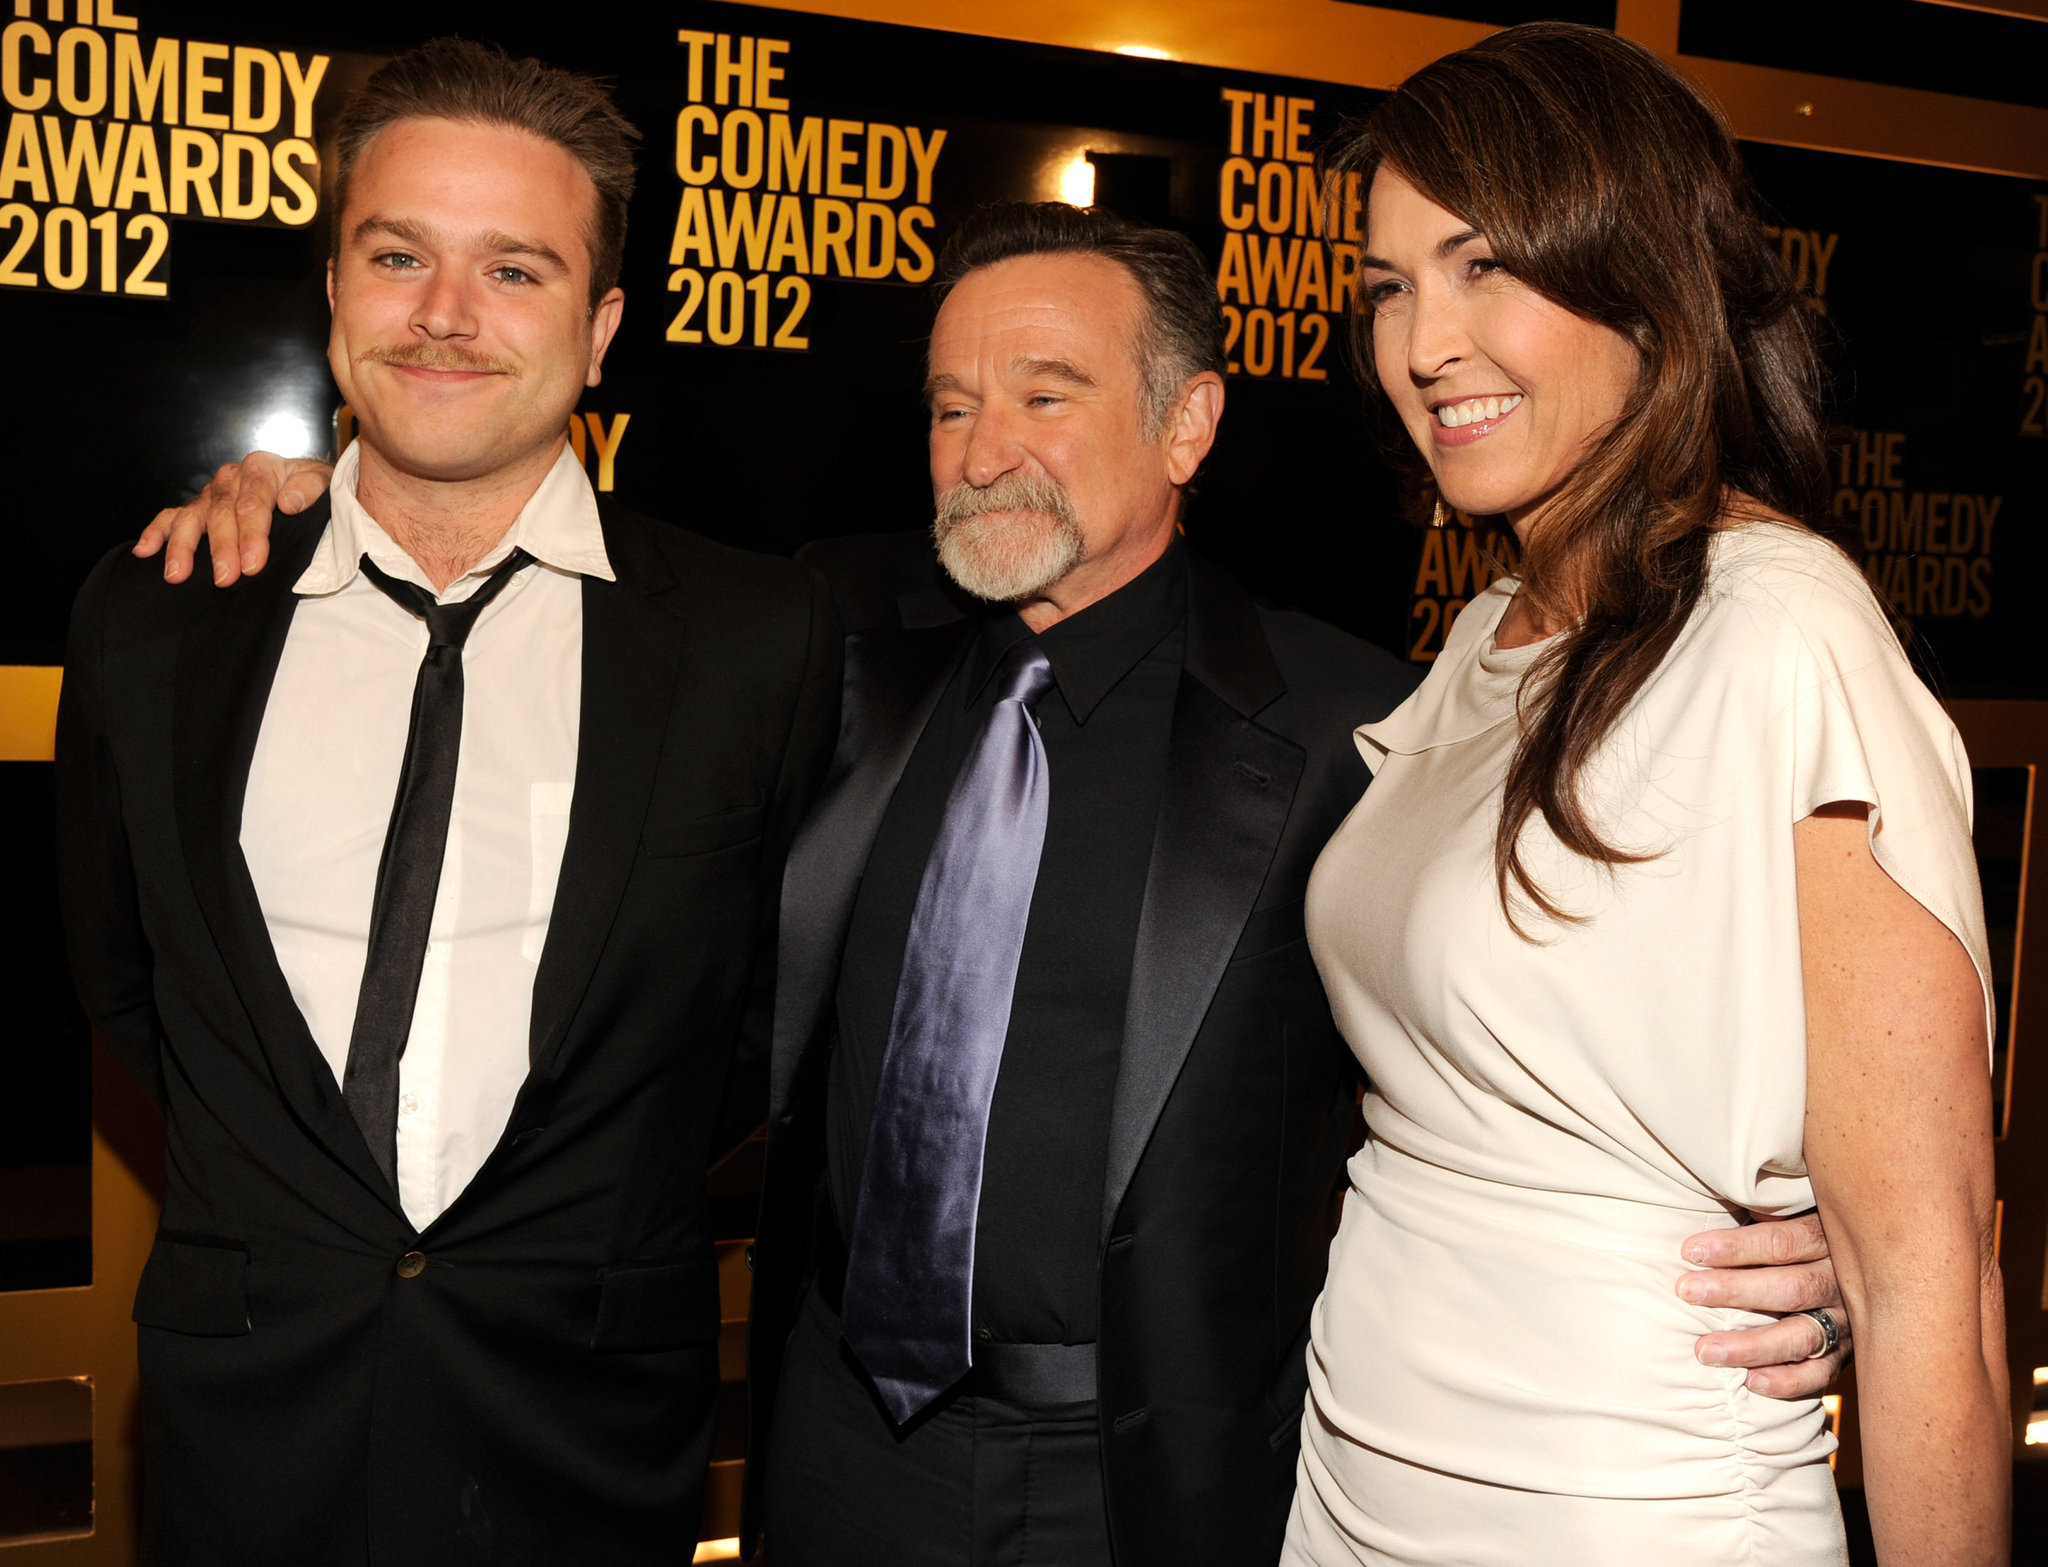 Robin Williams standing with his wife and son at an award show